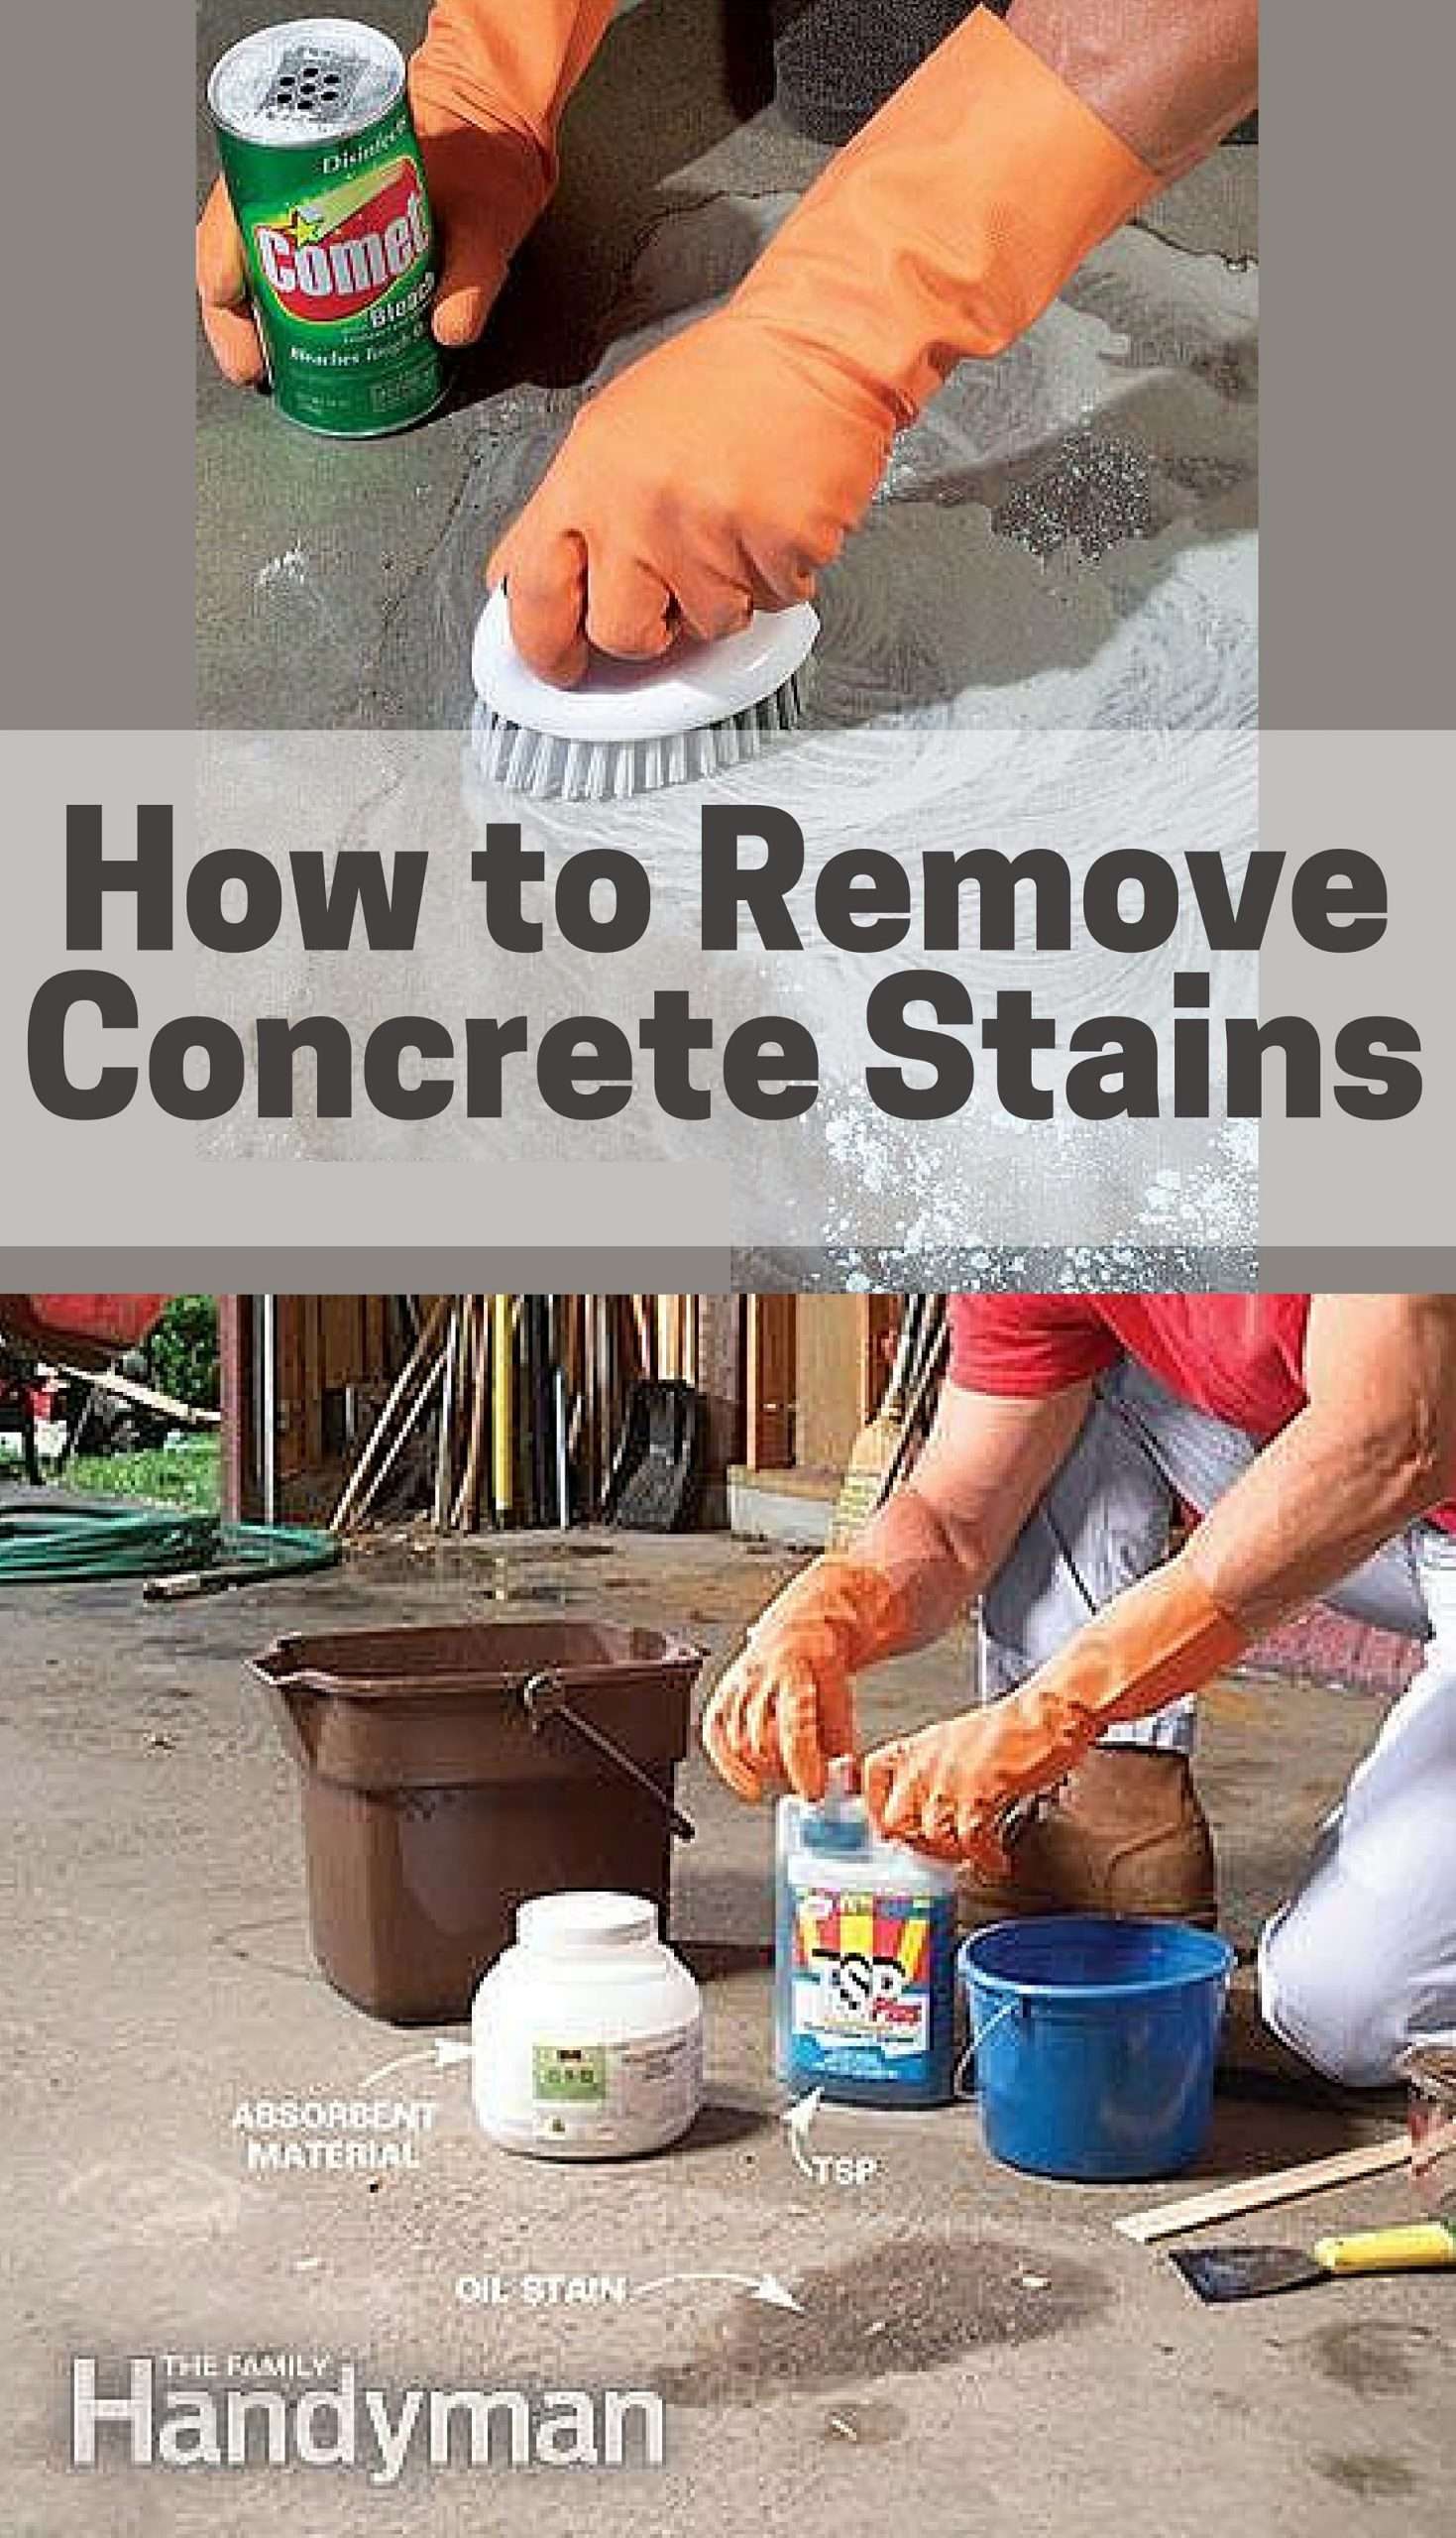 Removing Oil, Paint and Other Concrete Stains test